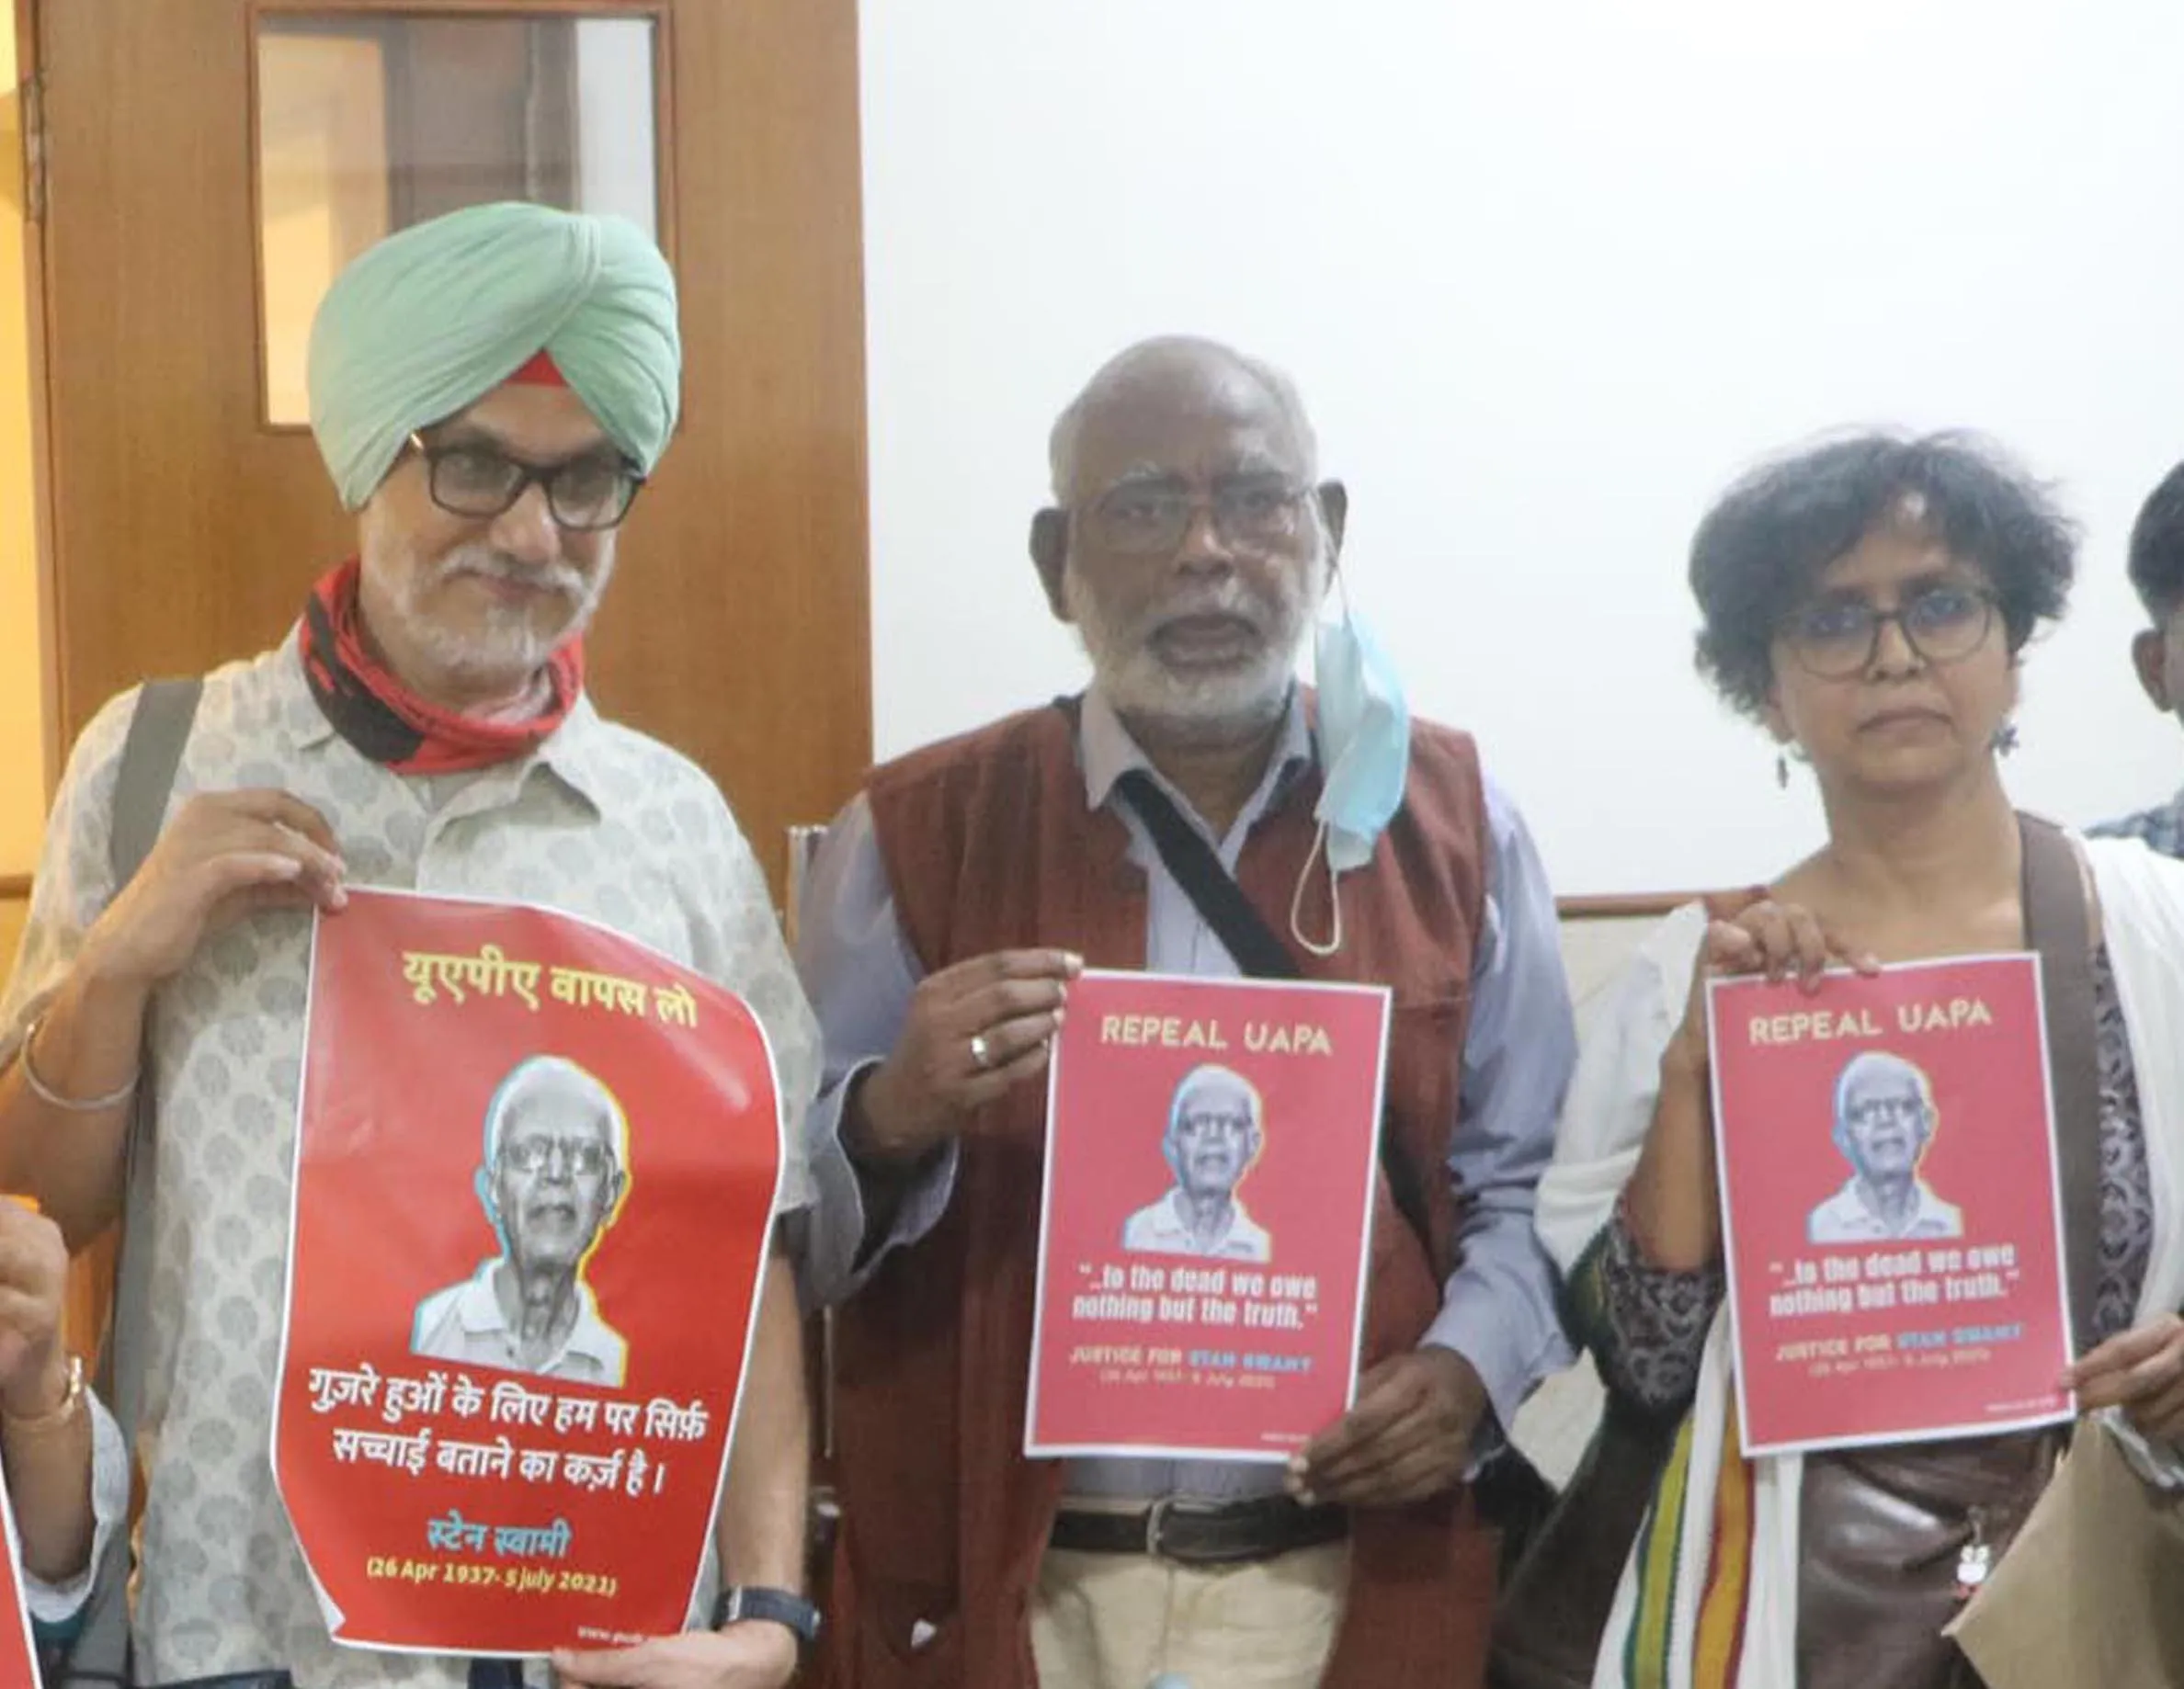 John Dayal (middle) and activists in July 2022 in New Delhi to mark the anniversary of Jesuit Father Stansamy, who died in police custody on trumped up terrorism charges.?w=200&h=150